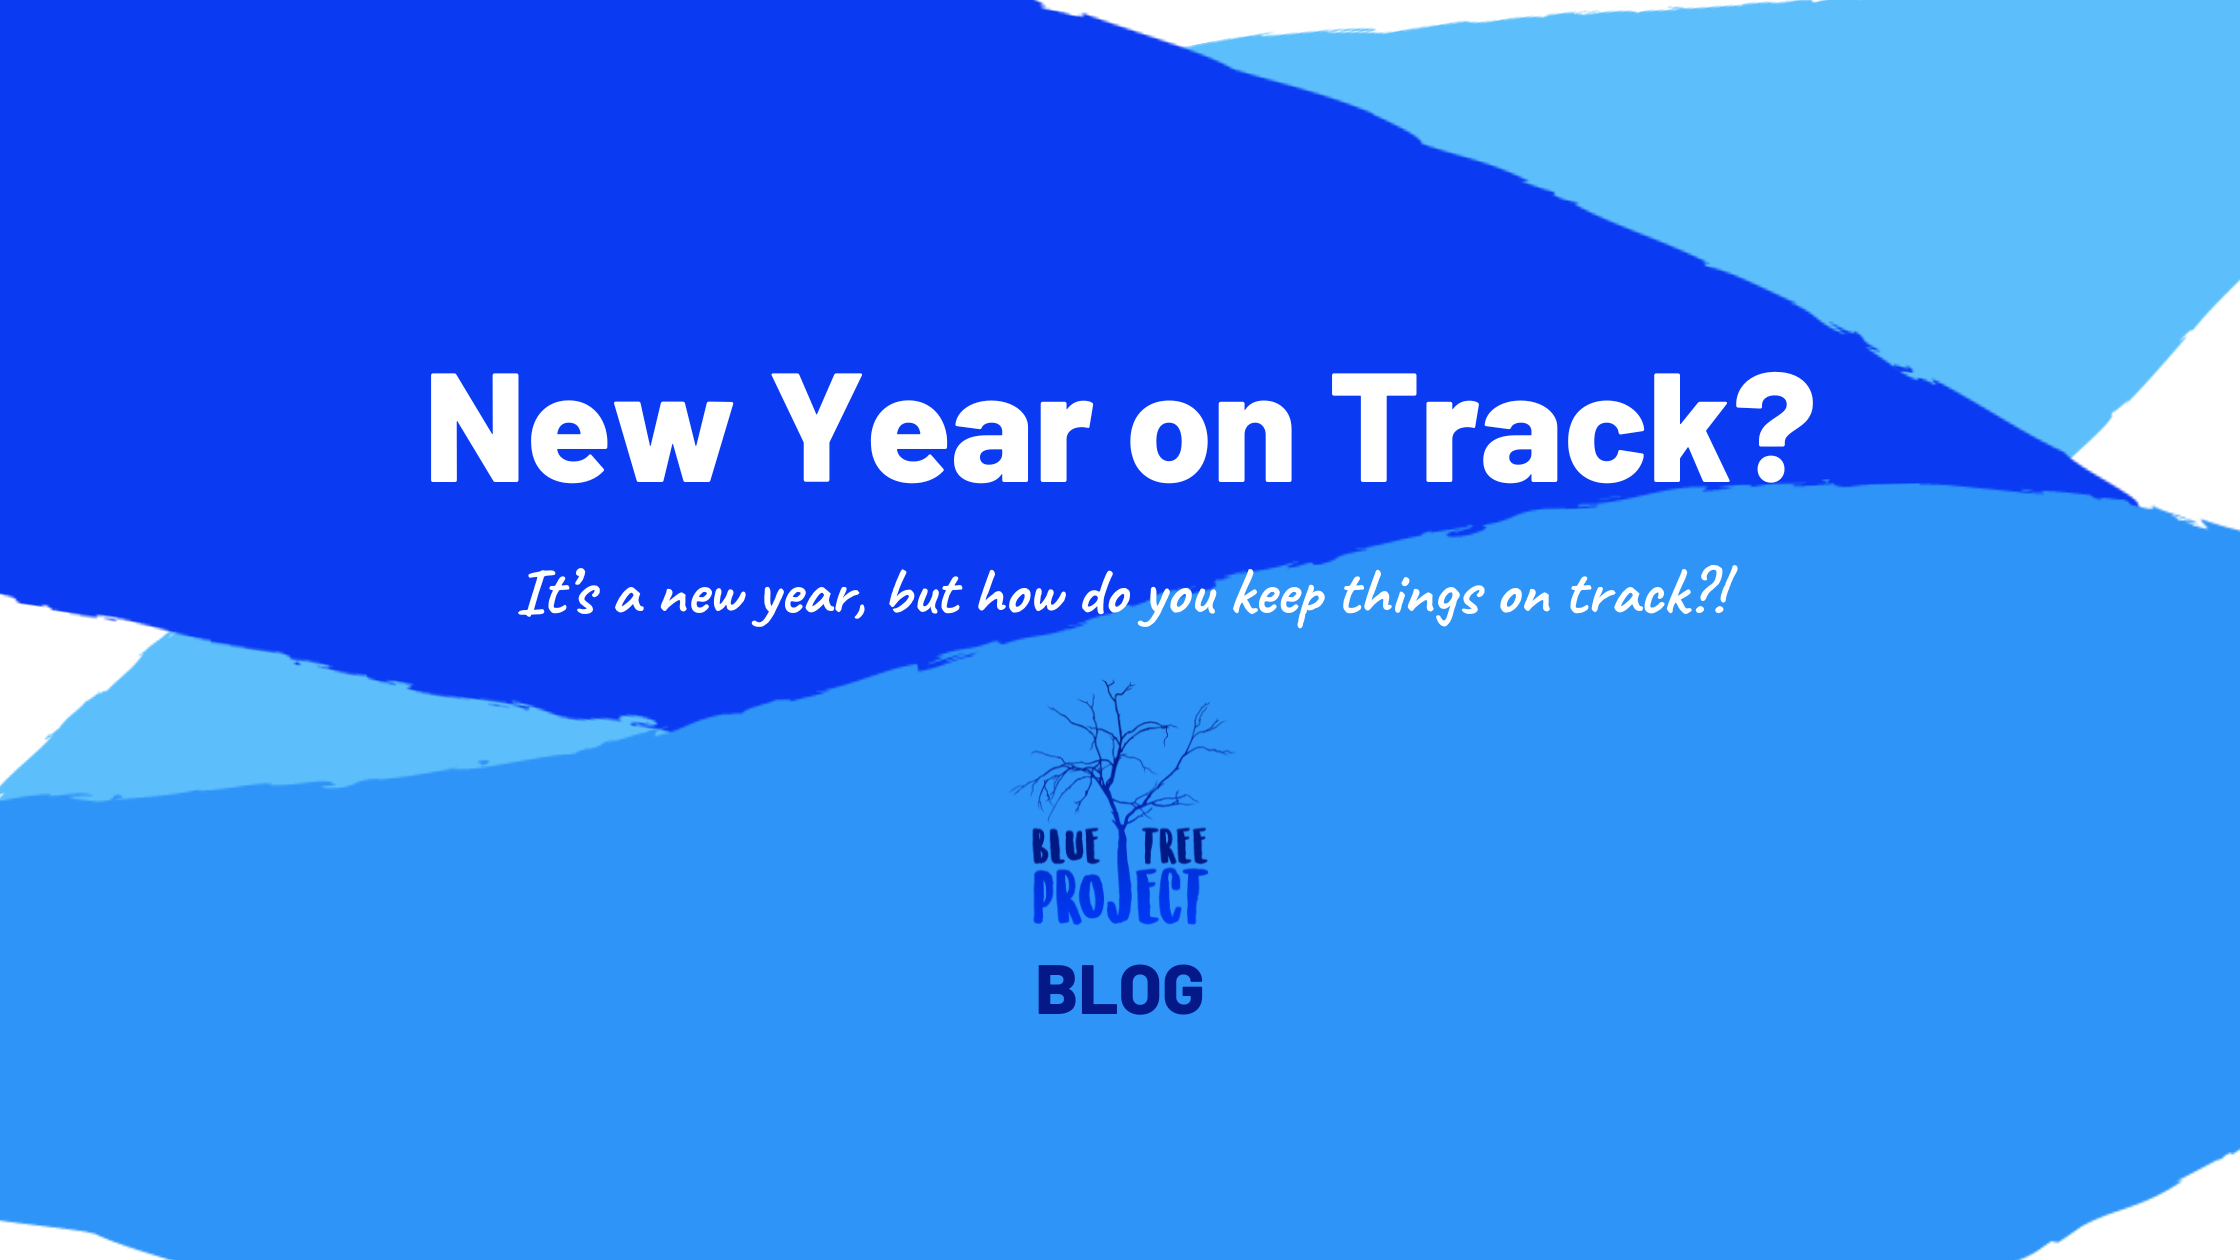 Is Your New Year on Track?